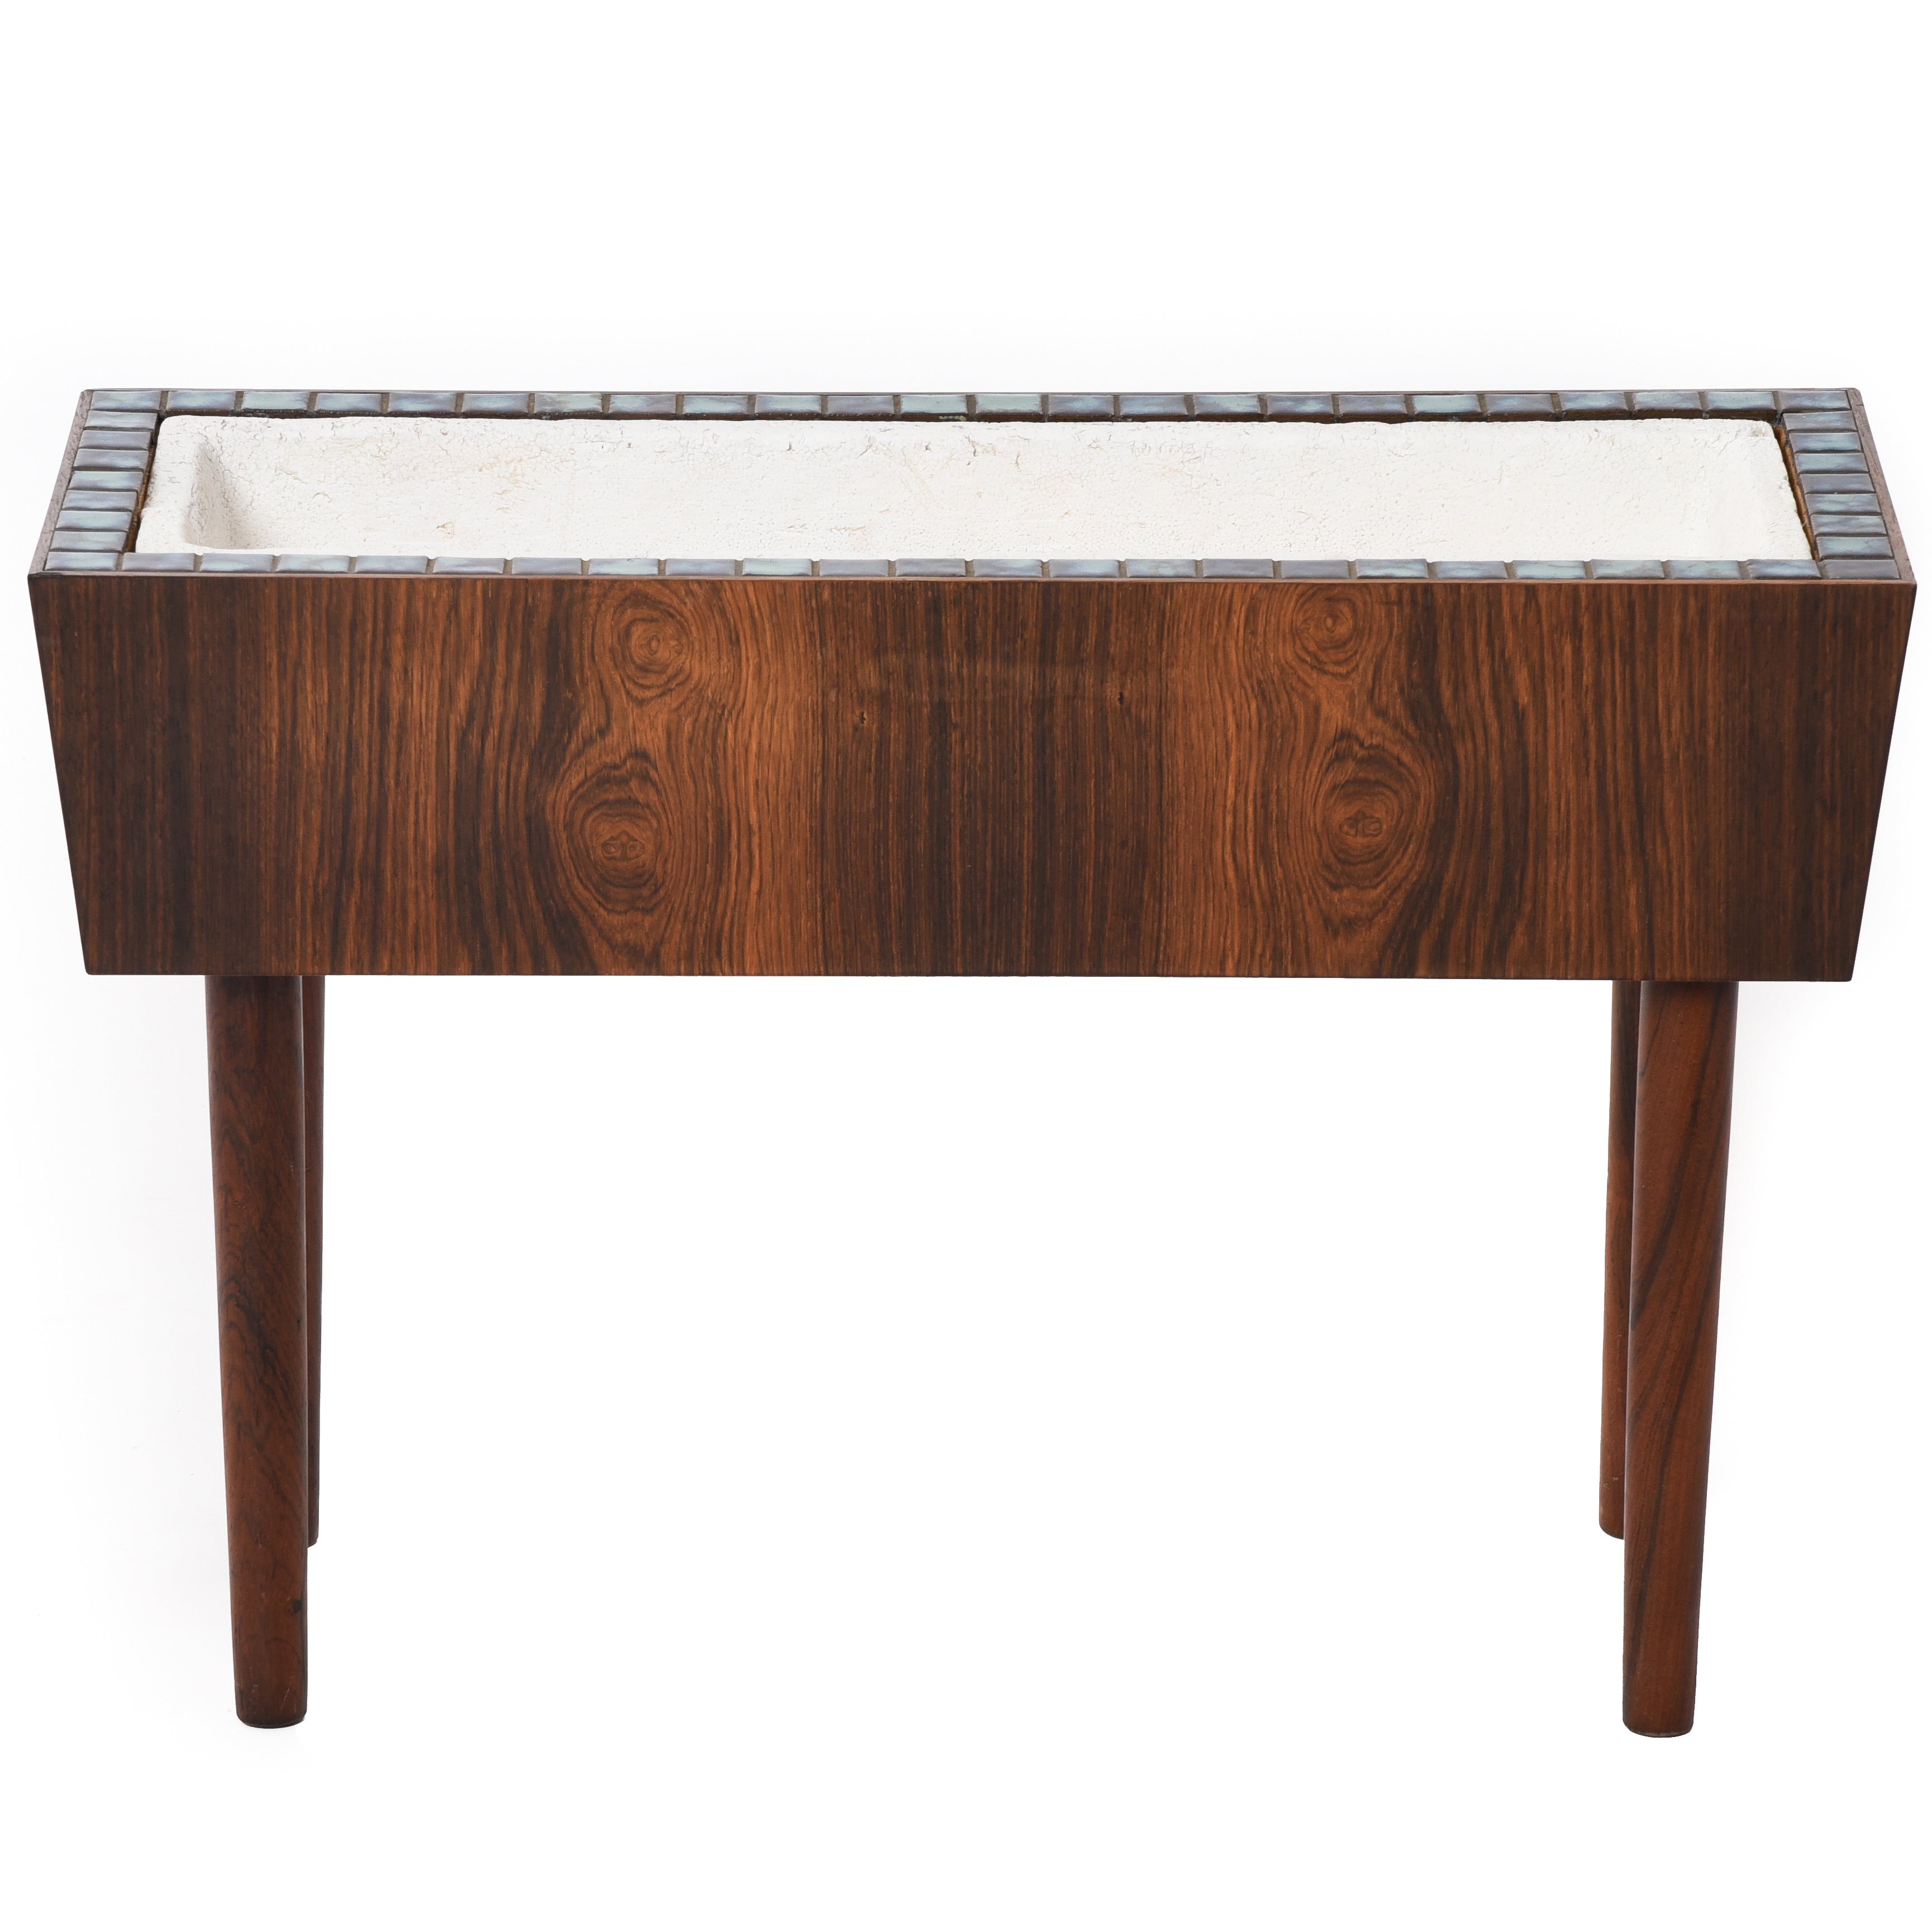 Danish Modern Rosewood and Tile Planter, Mid Century